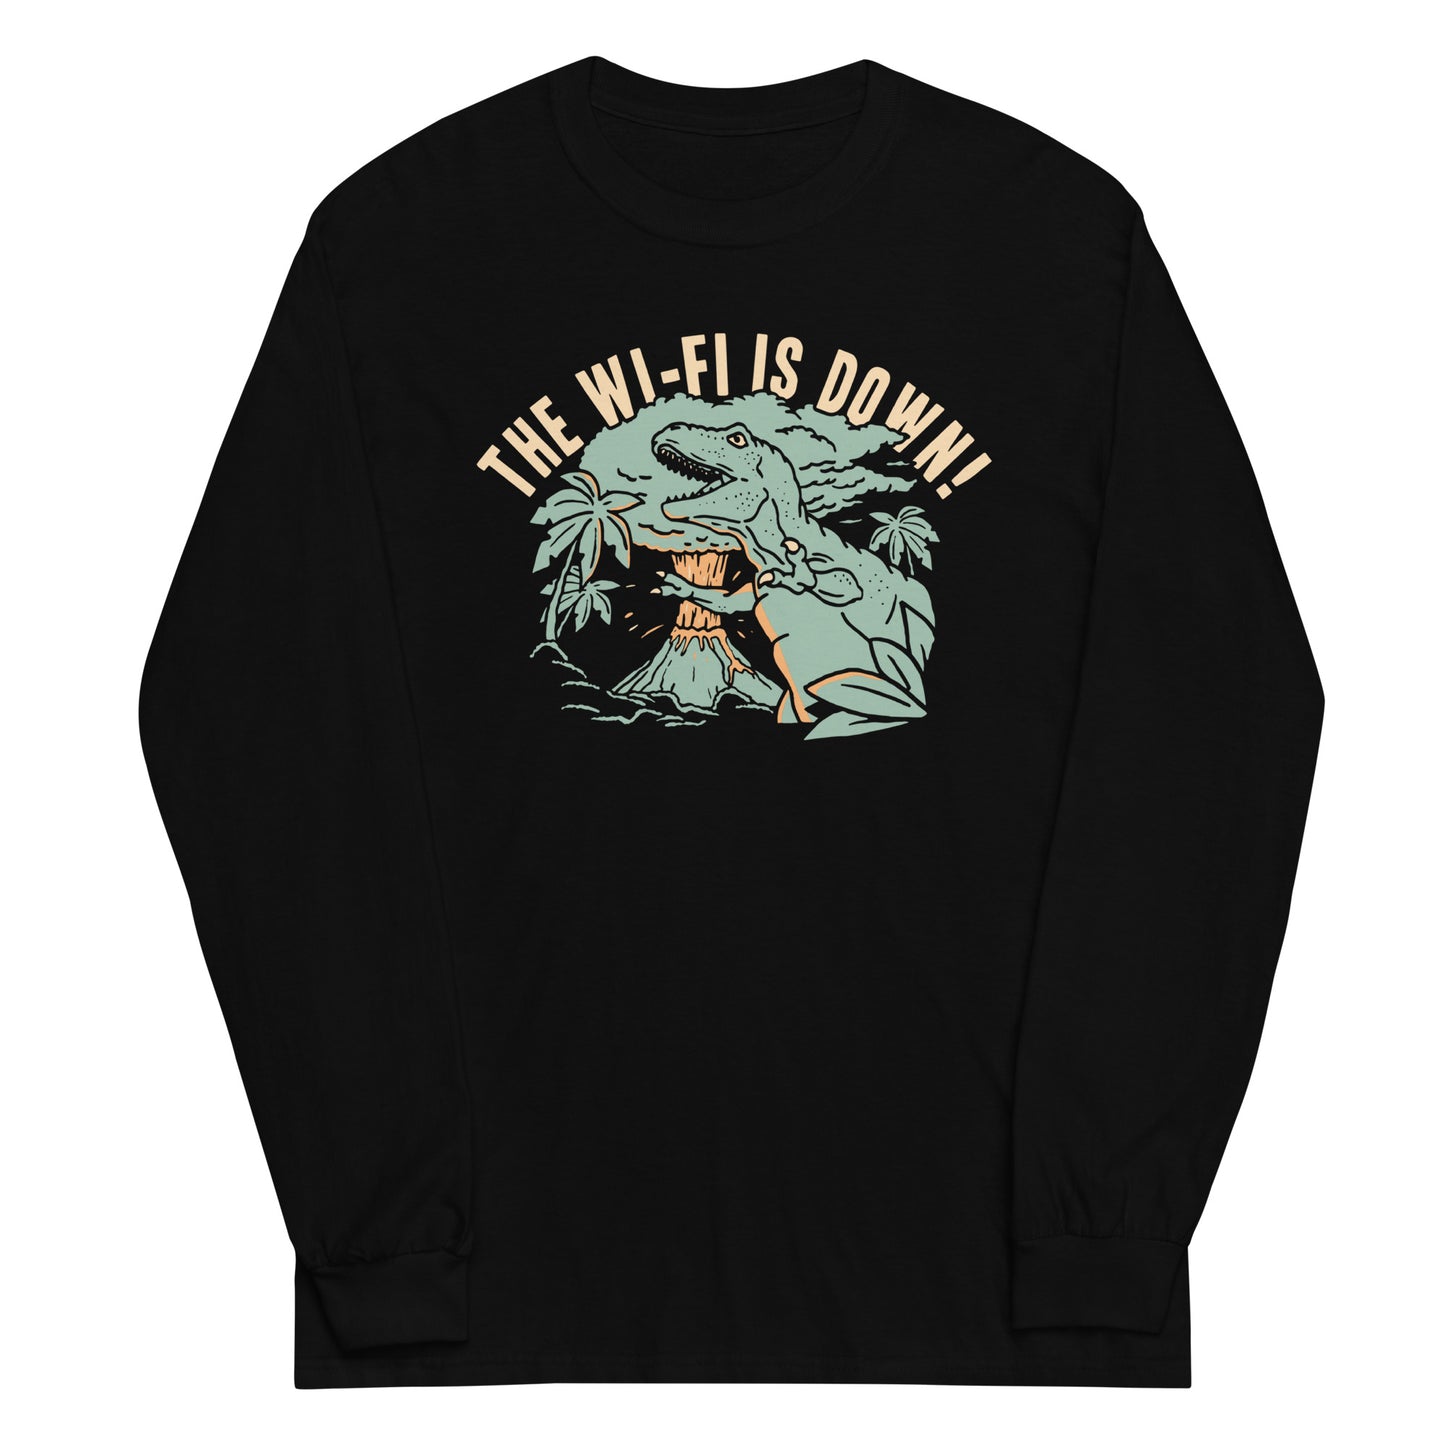 The Wi-Fi Is Down! Unisex Long Sleeve Tee